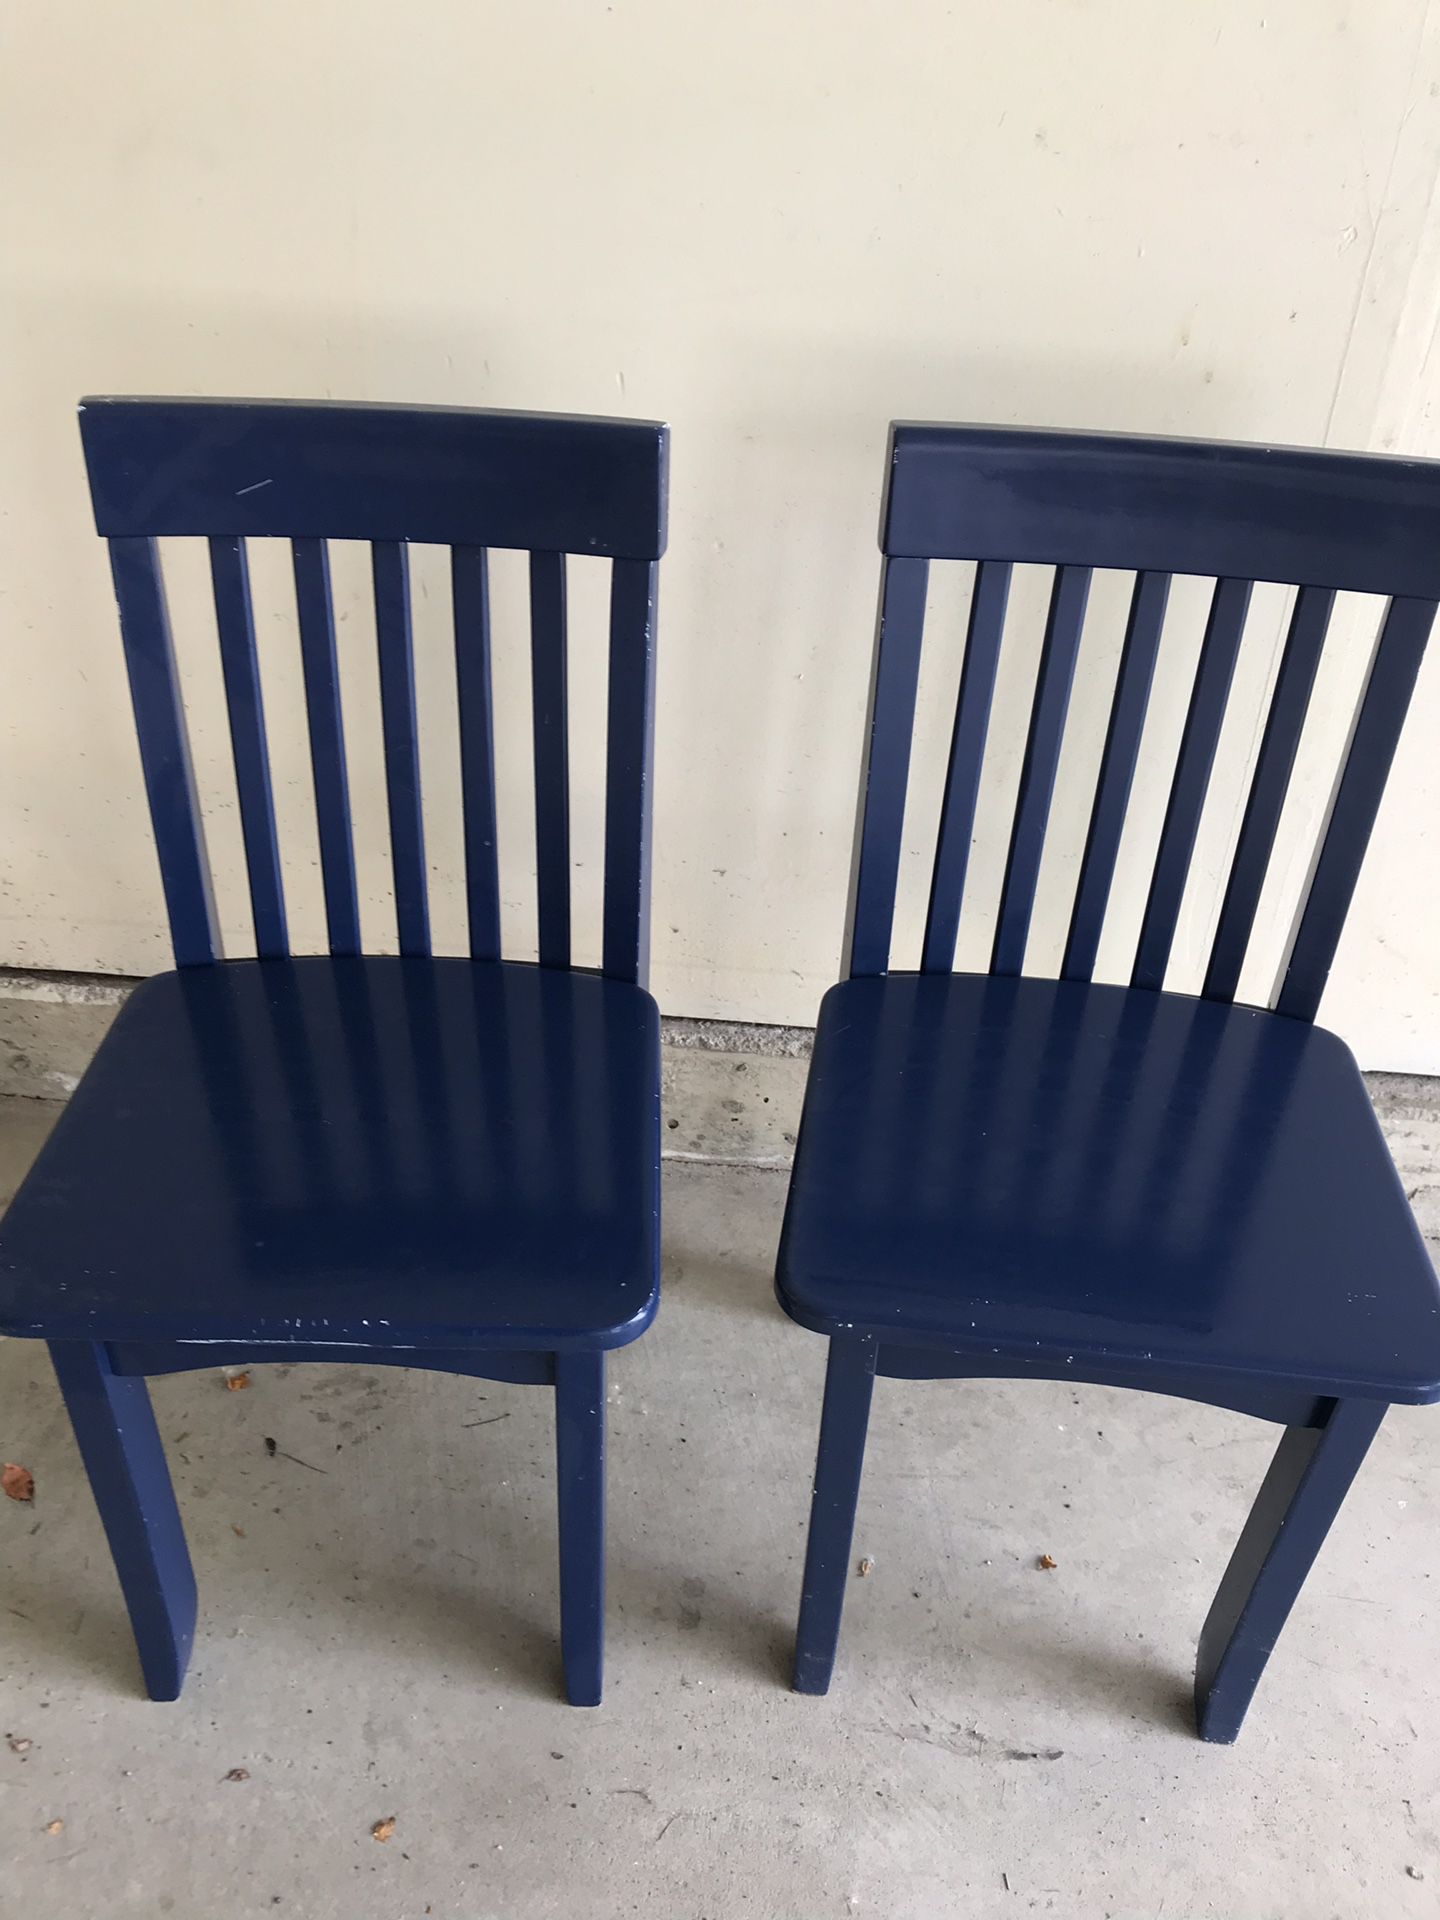 Two kids chairs, blue